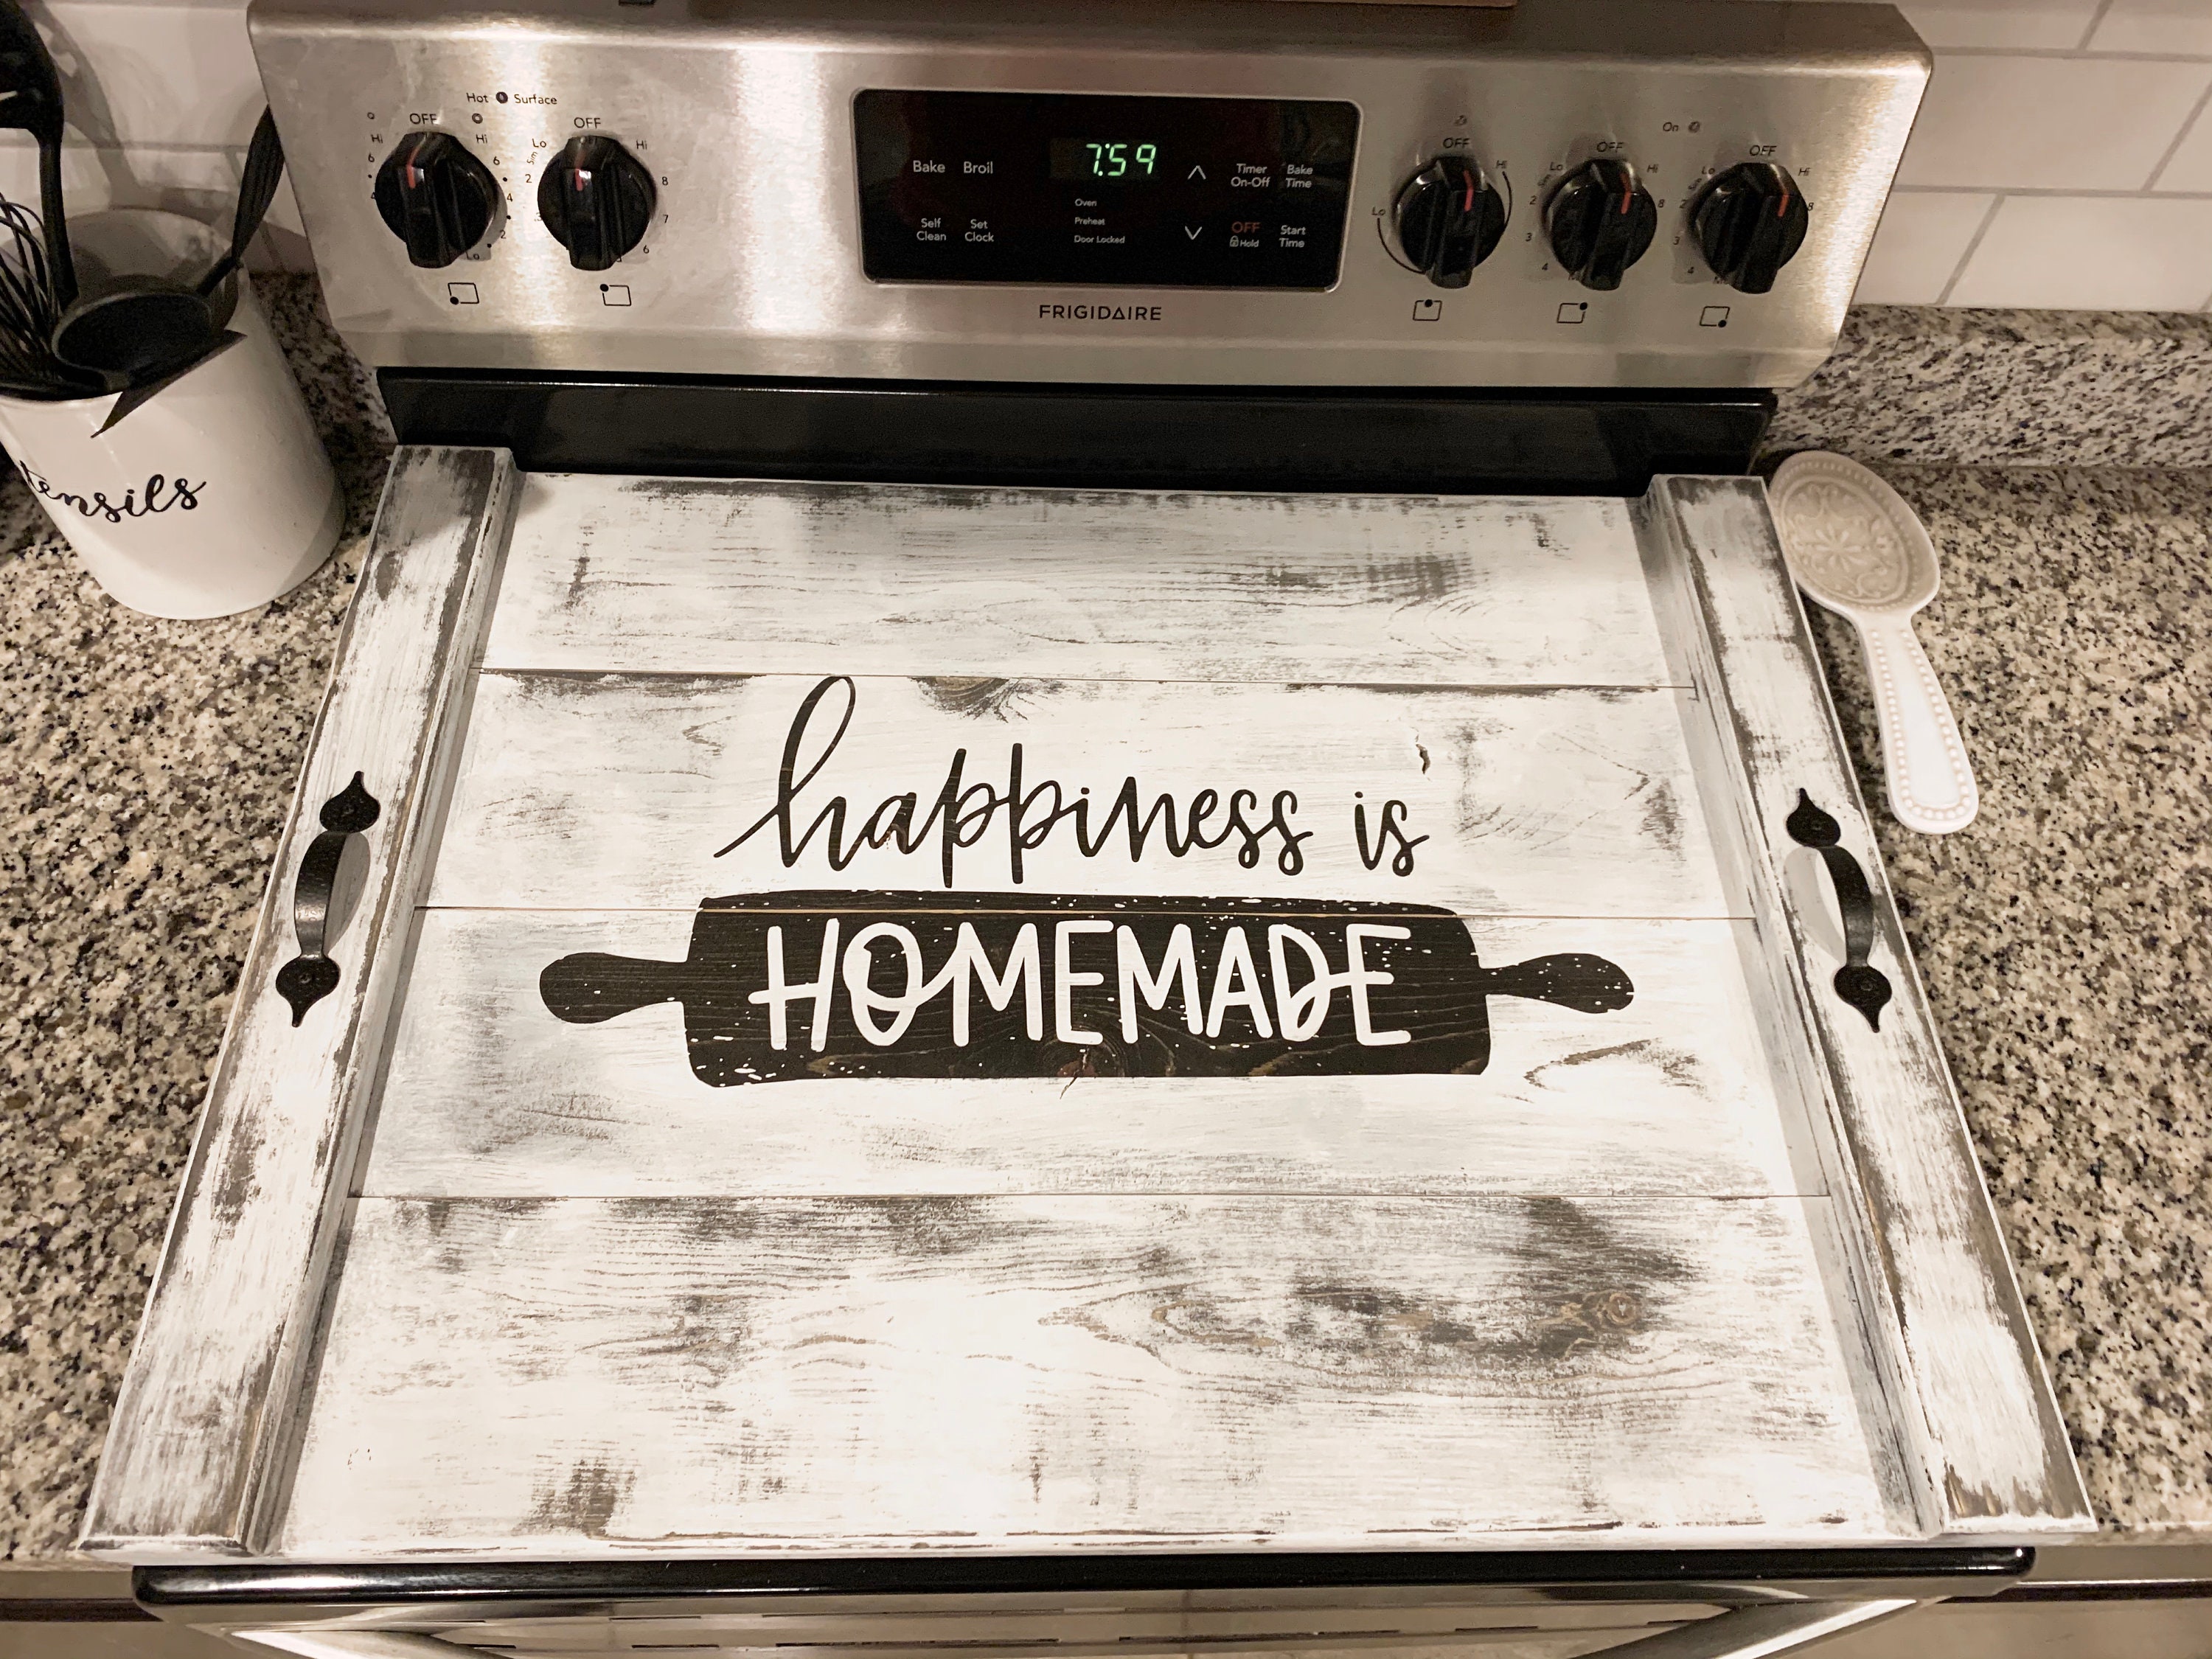 SIGN DESIGN - Stove Cover / Noodle board / Tray – Two Sisters DIY